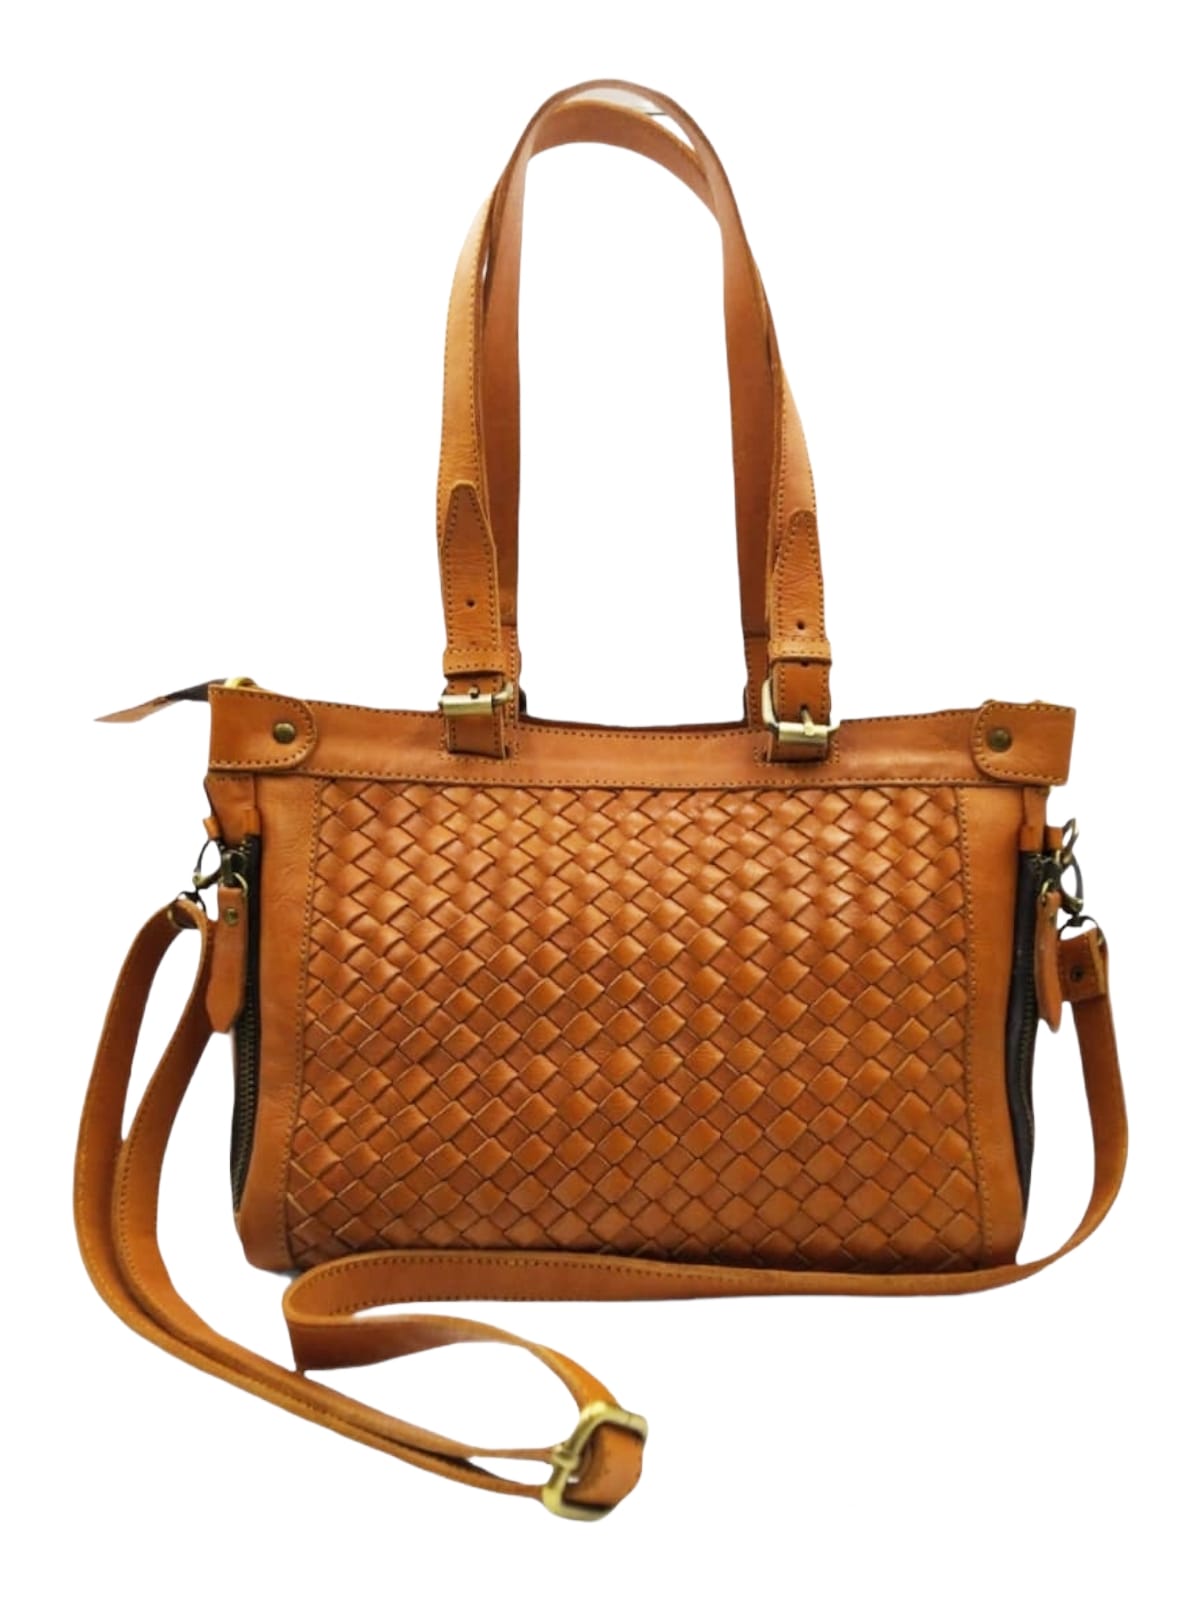 Filiana Woven Leather Bag by Lin's Craft Leather